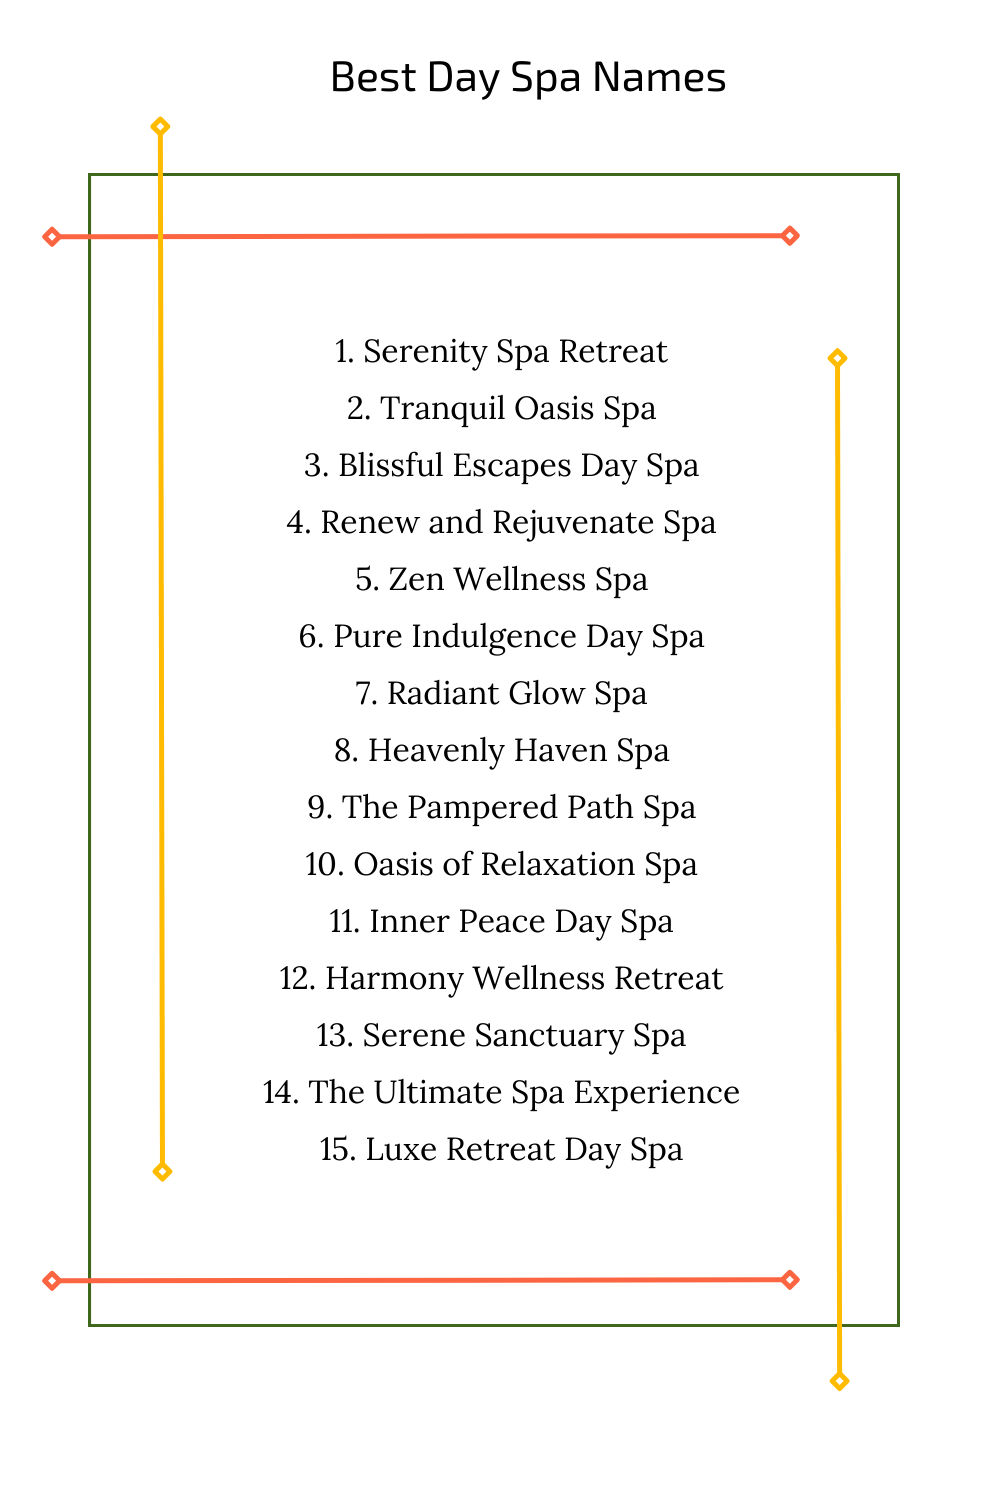 Best Day Spa Names